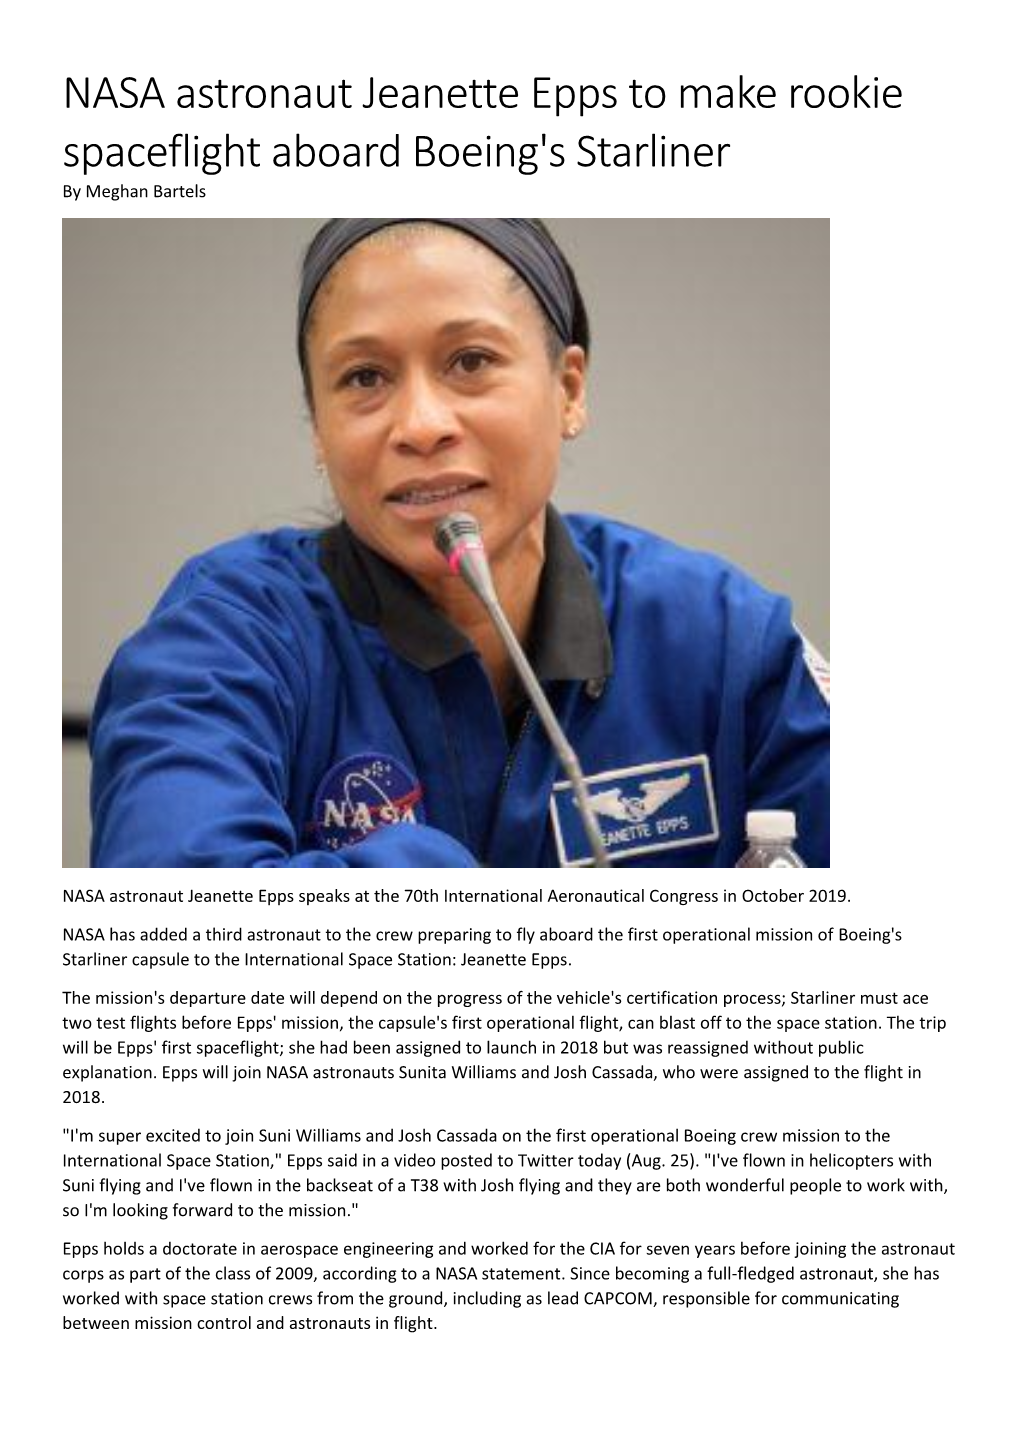 NASA Astronaut Jeanette Epps to Make Rookie Spaceflight Aboard Boeing's Starliner by Meghan Bartels